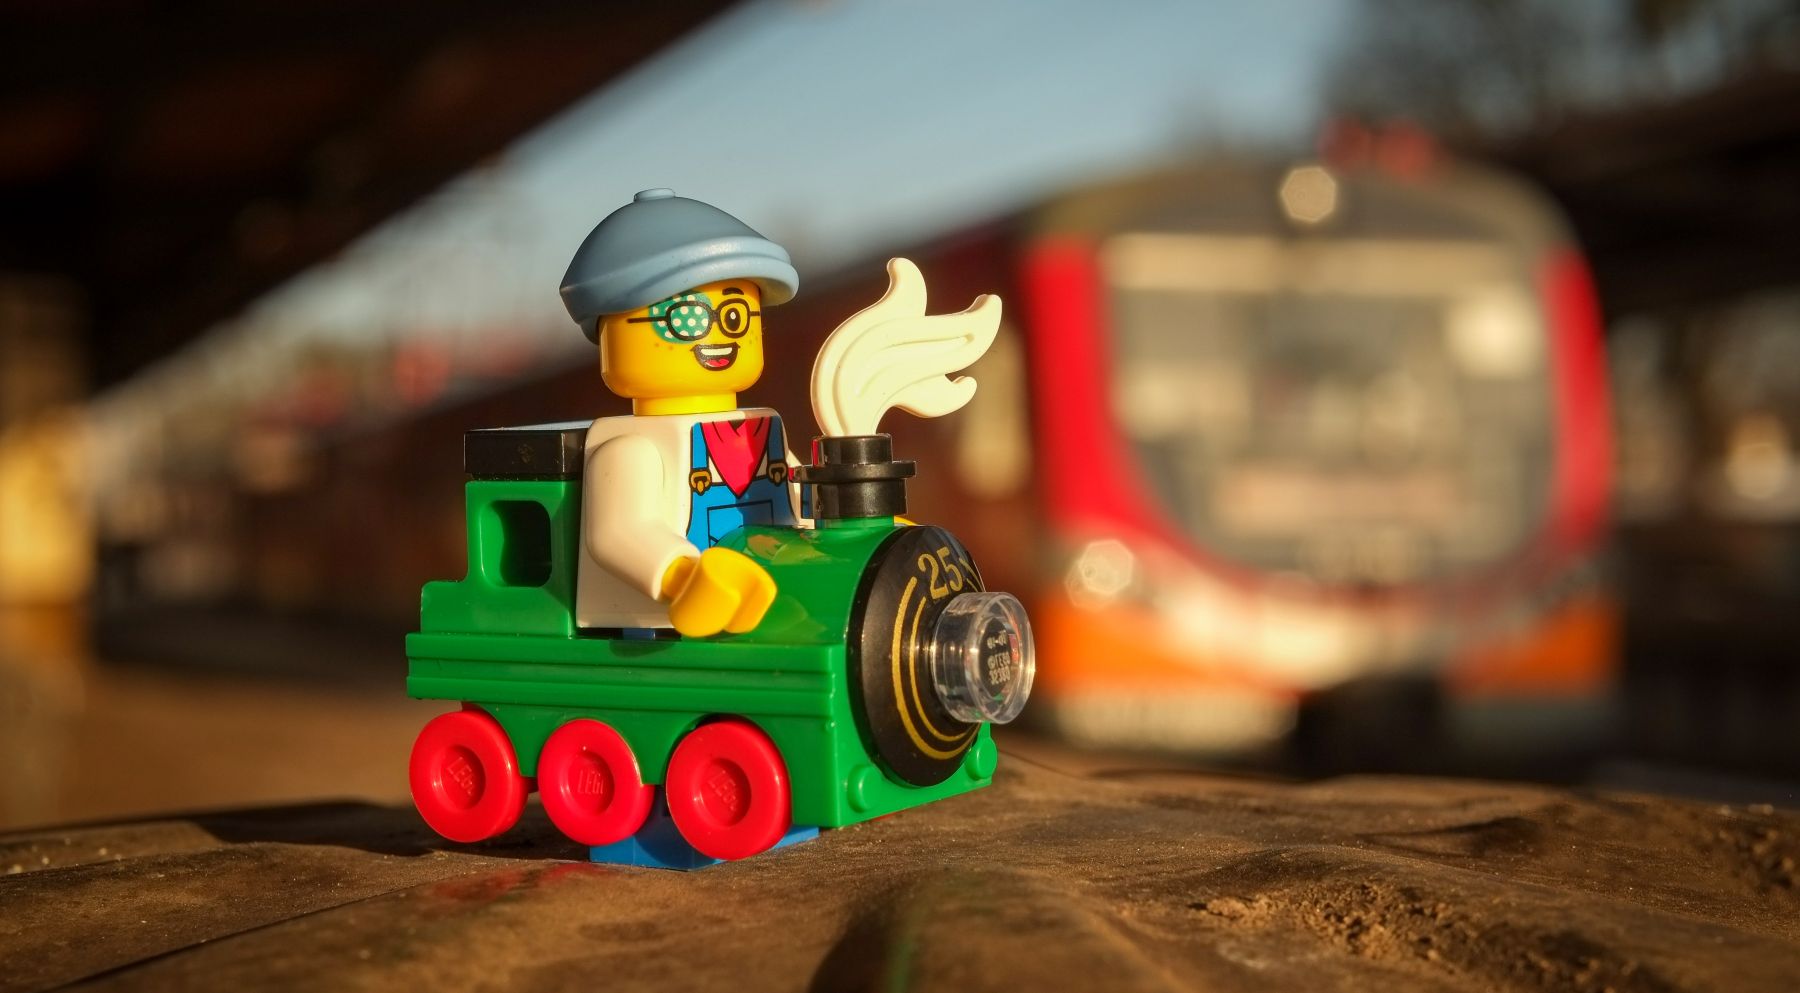 A LEGO minifigure of a boy in the locomotive costume, posing with train in the background, on the train station